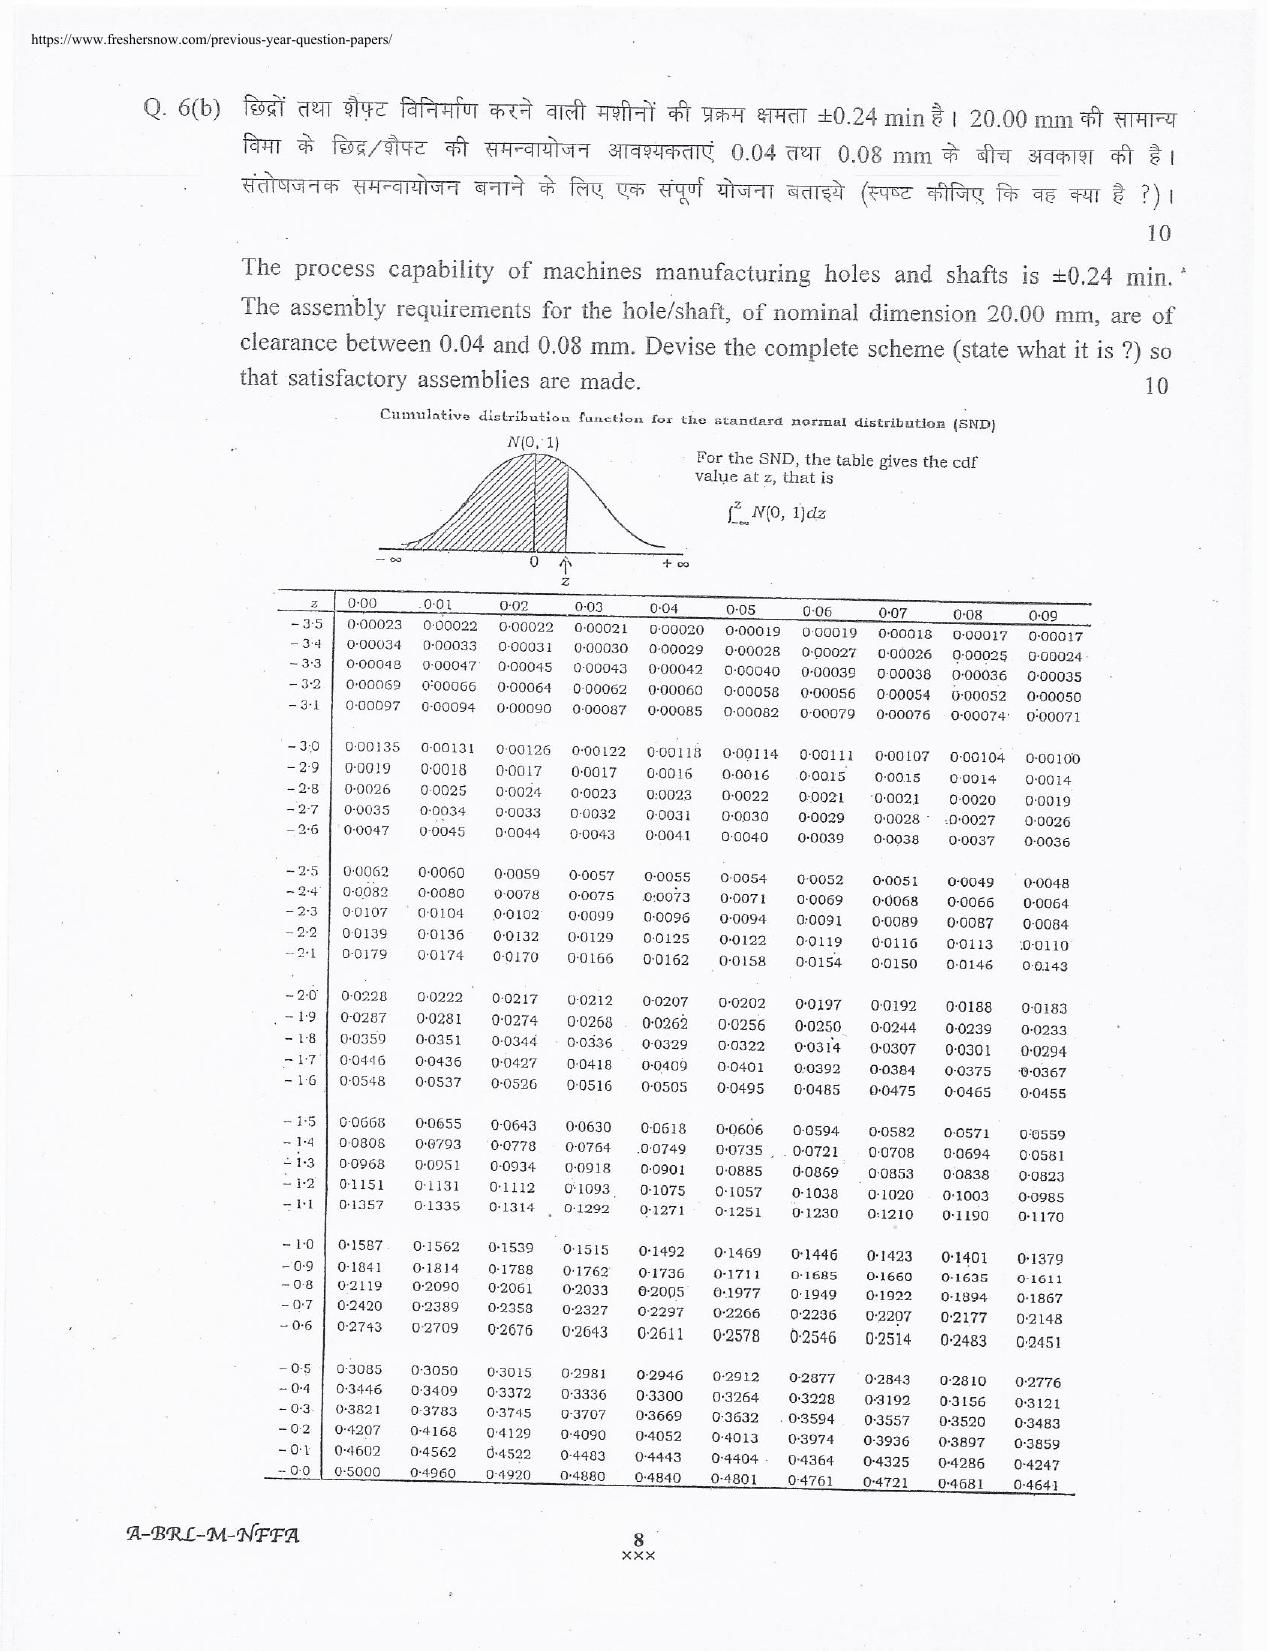 lakshadweep.gov.in Mechanical Engineering Question Papers - Page 8